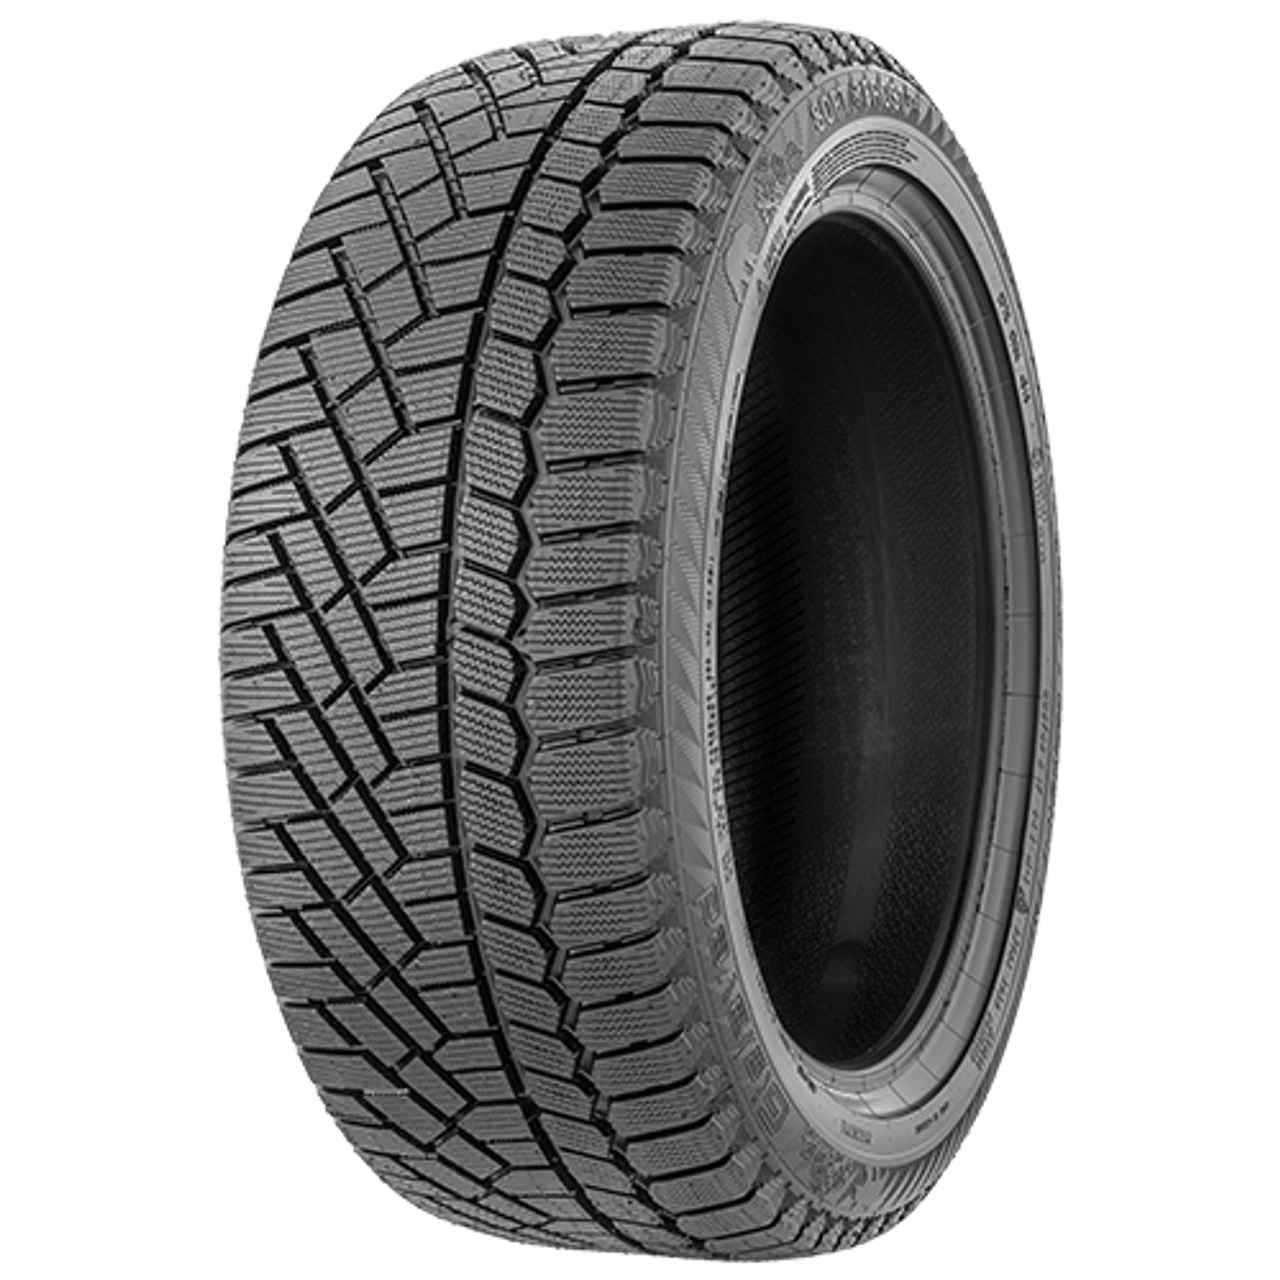 GISLAVED SOFT*FROST 200 195/55R16 91T NORDIC COMPOUND BSW XL